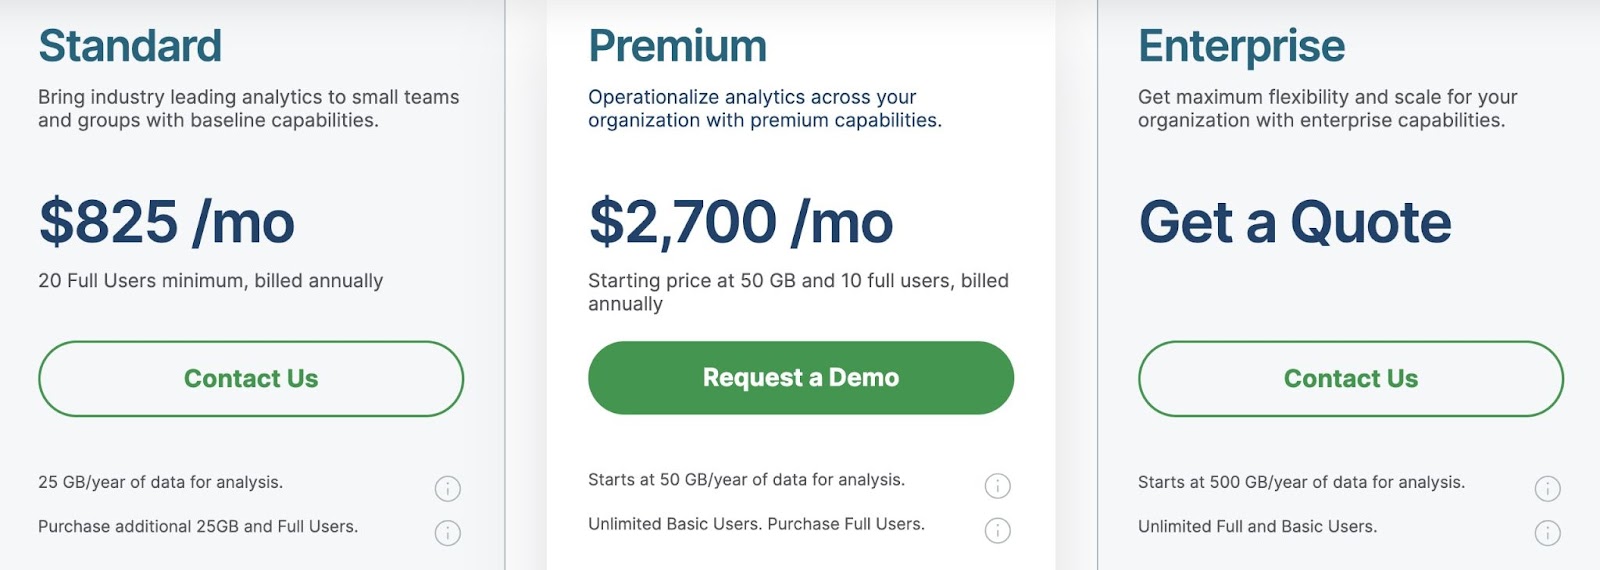 Pricing page on "Qlik Cloud Analytics" showing their three different plans along with the pricing & details for each.